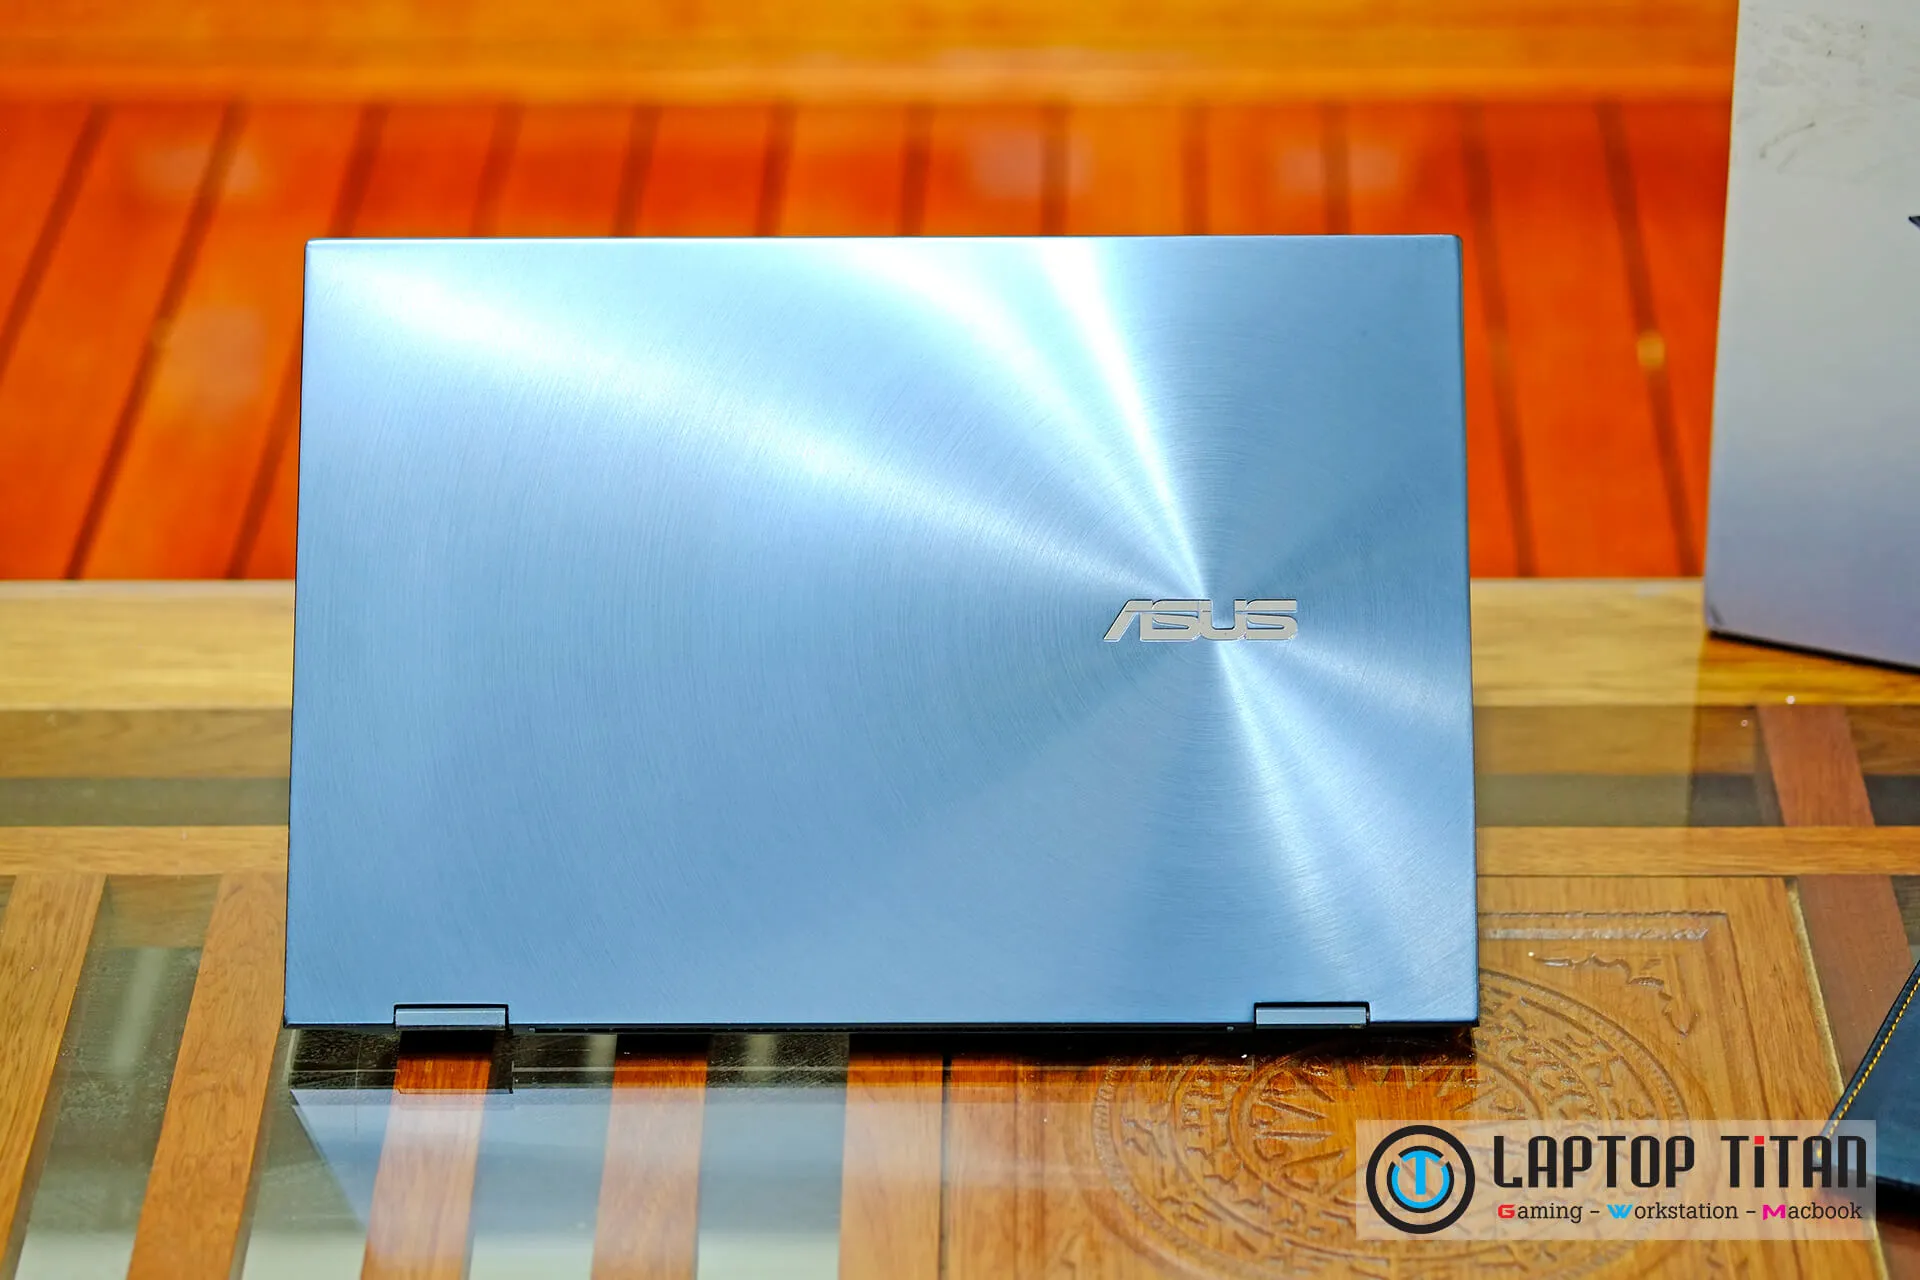 Asus Zenbook Flip Ux363Ea-Hp130T I5 1135G7/8Gb/512Gb Ssd/13.3&Quot; Fhd Oled Hdr Touch/Win10